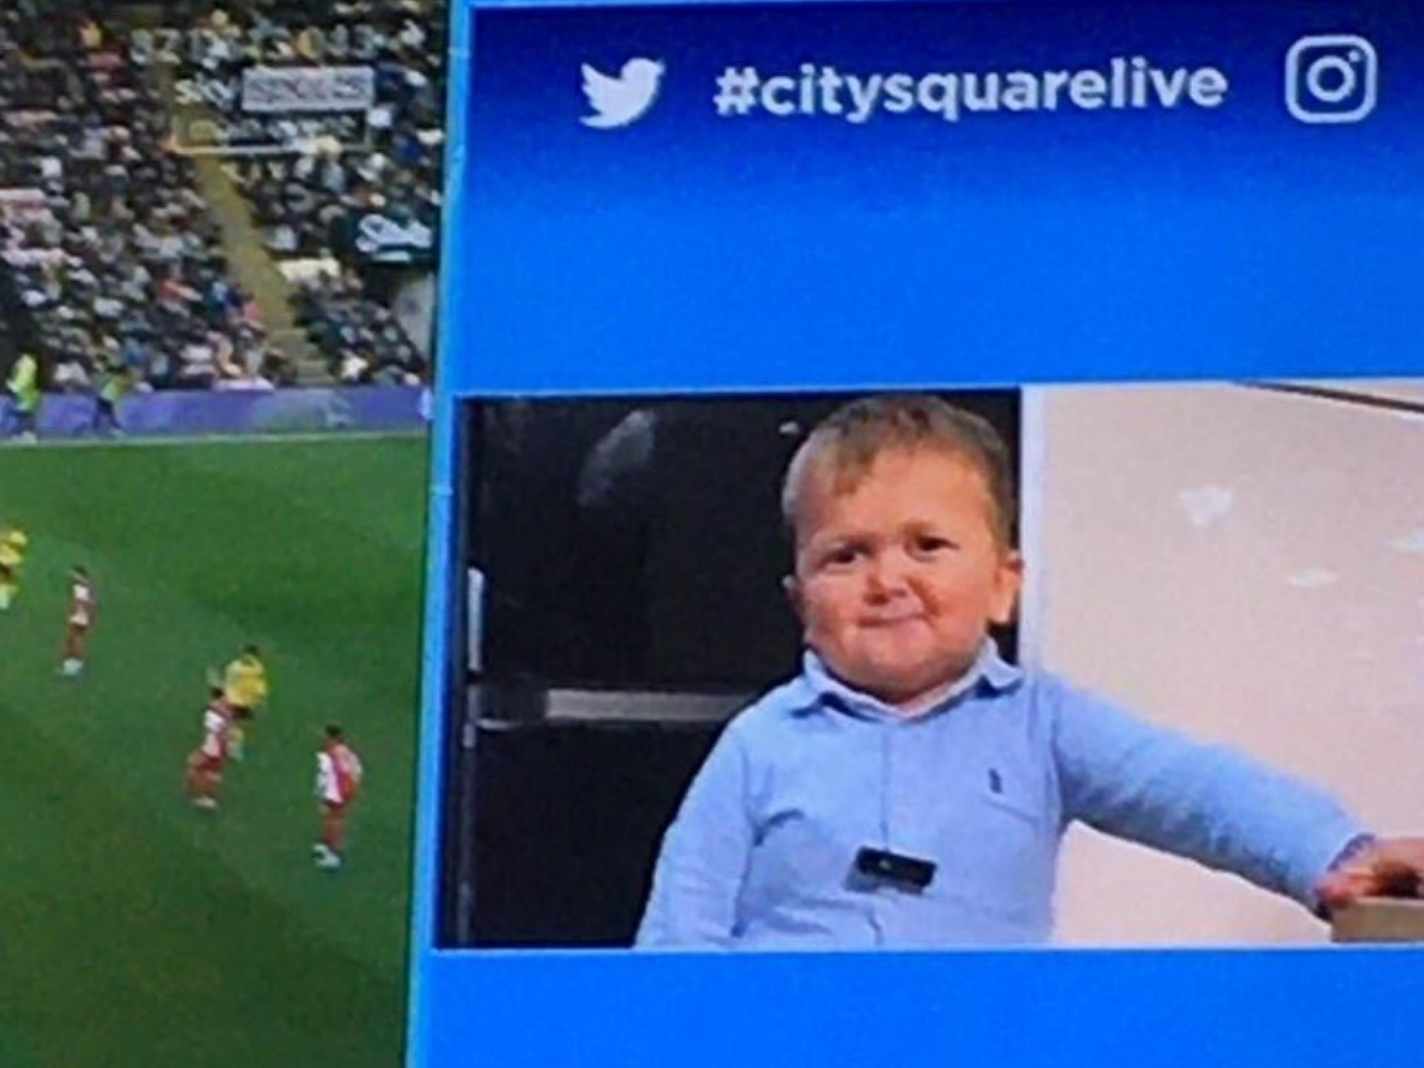 Man City fans get Hasbulla up on the big screen at Etihad as hilarious trend continues